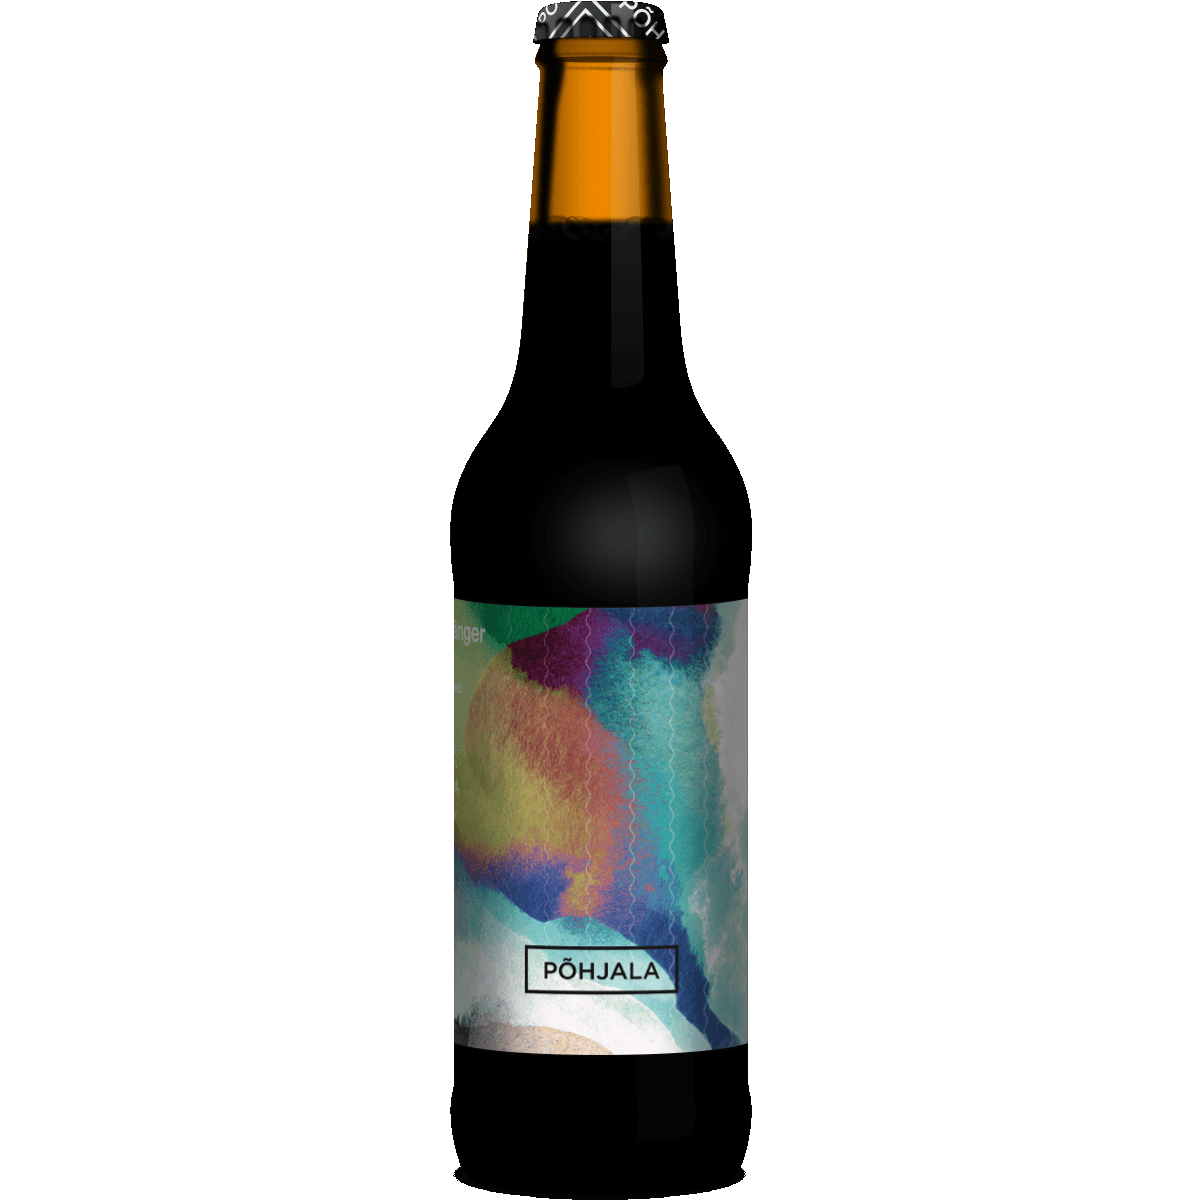 Pohjala Bänger Imperial Stout with prunes, vanilla, and habanero chillies – Estonia